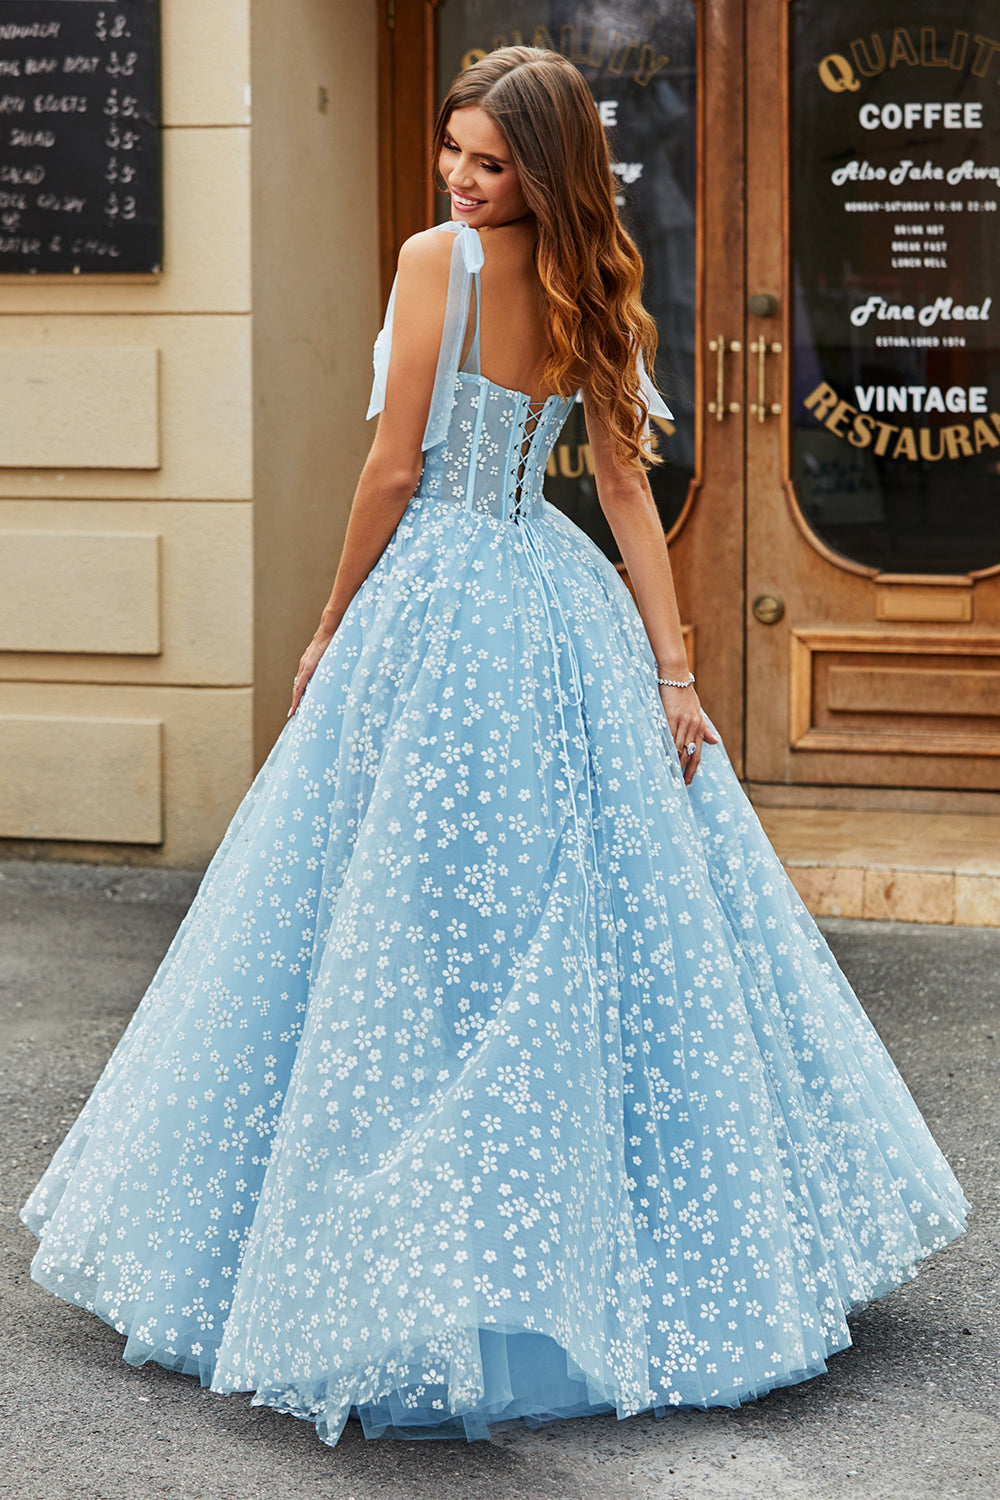 Sky Blue Ball-Gown Spaghetti Straps Corset Long Prom Dress With Floral